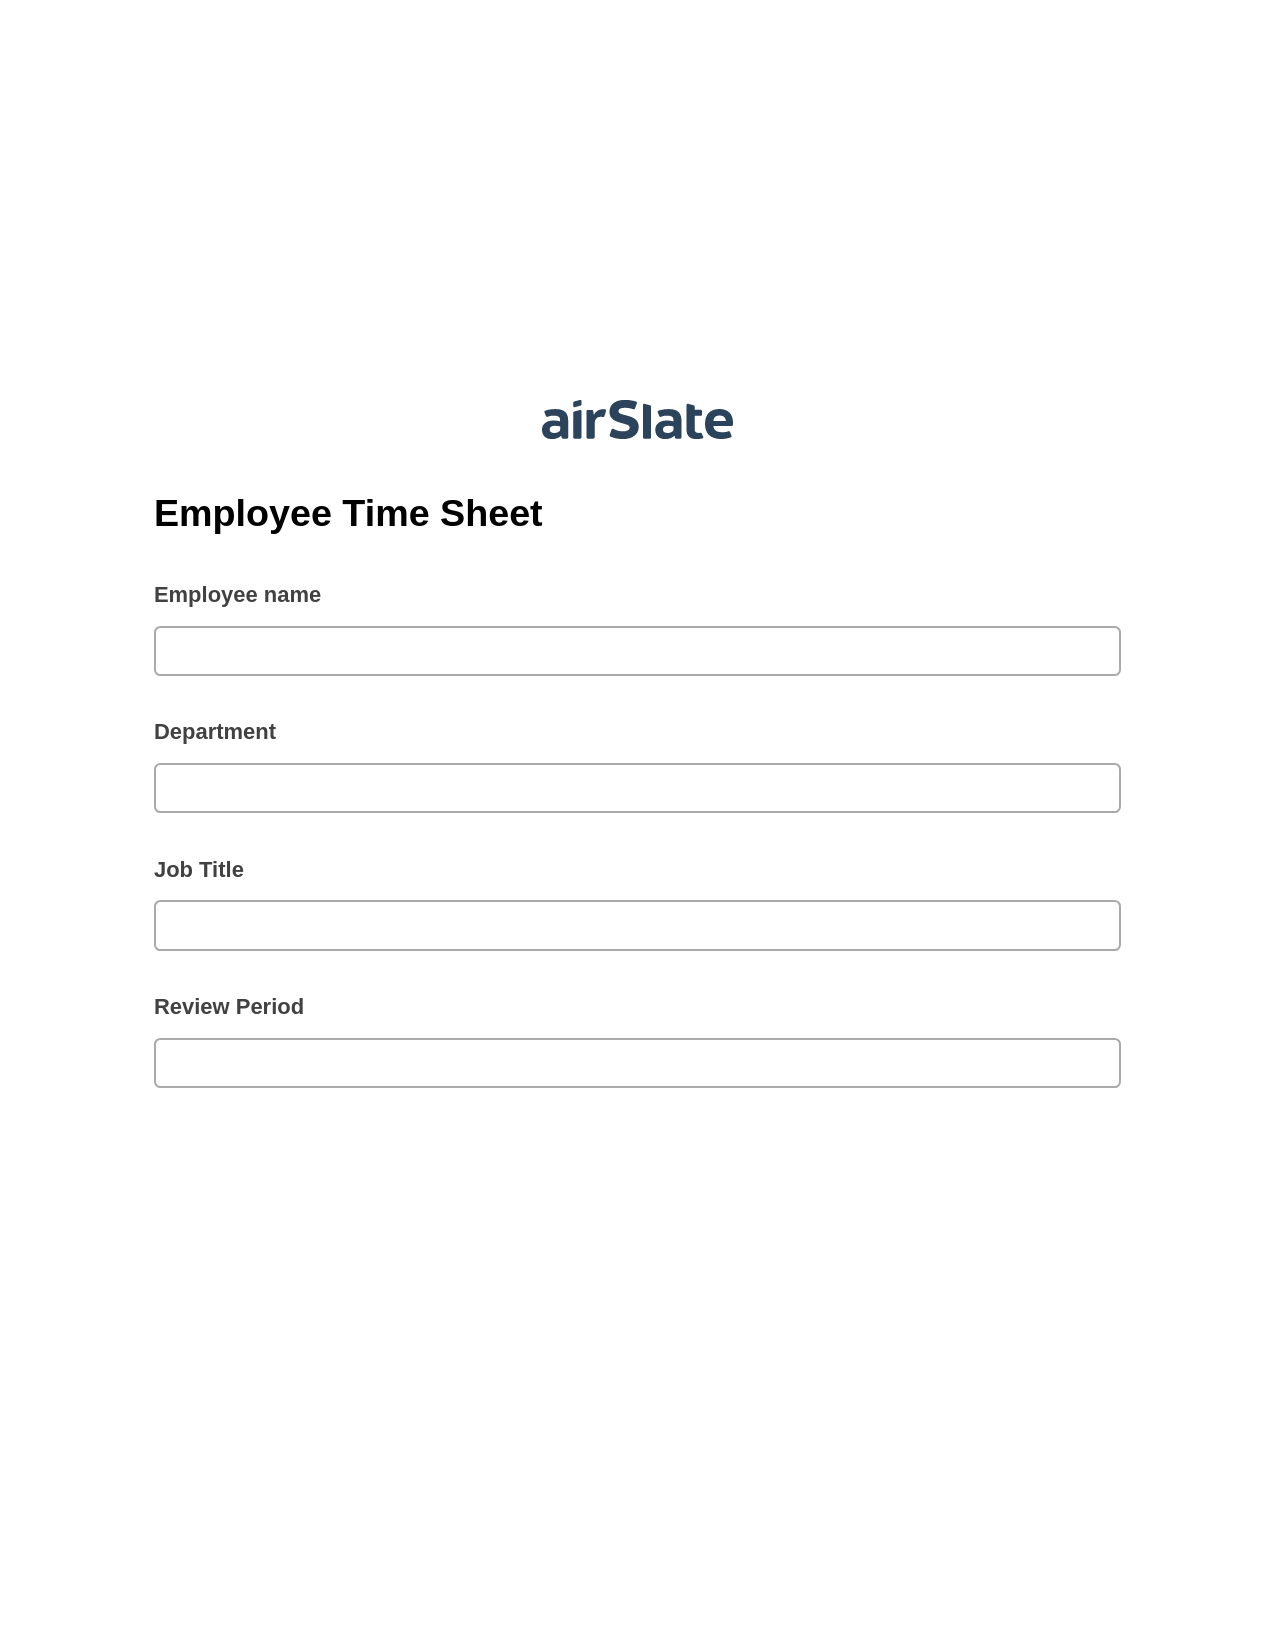 Employee Time Sheet Pre-fill from another Slate Bot, Create slate addon, Archive to Google Drive Bot